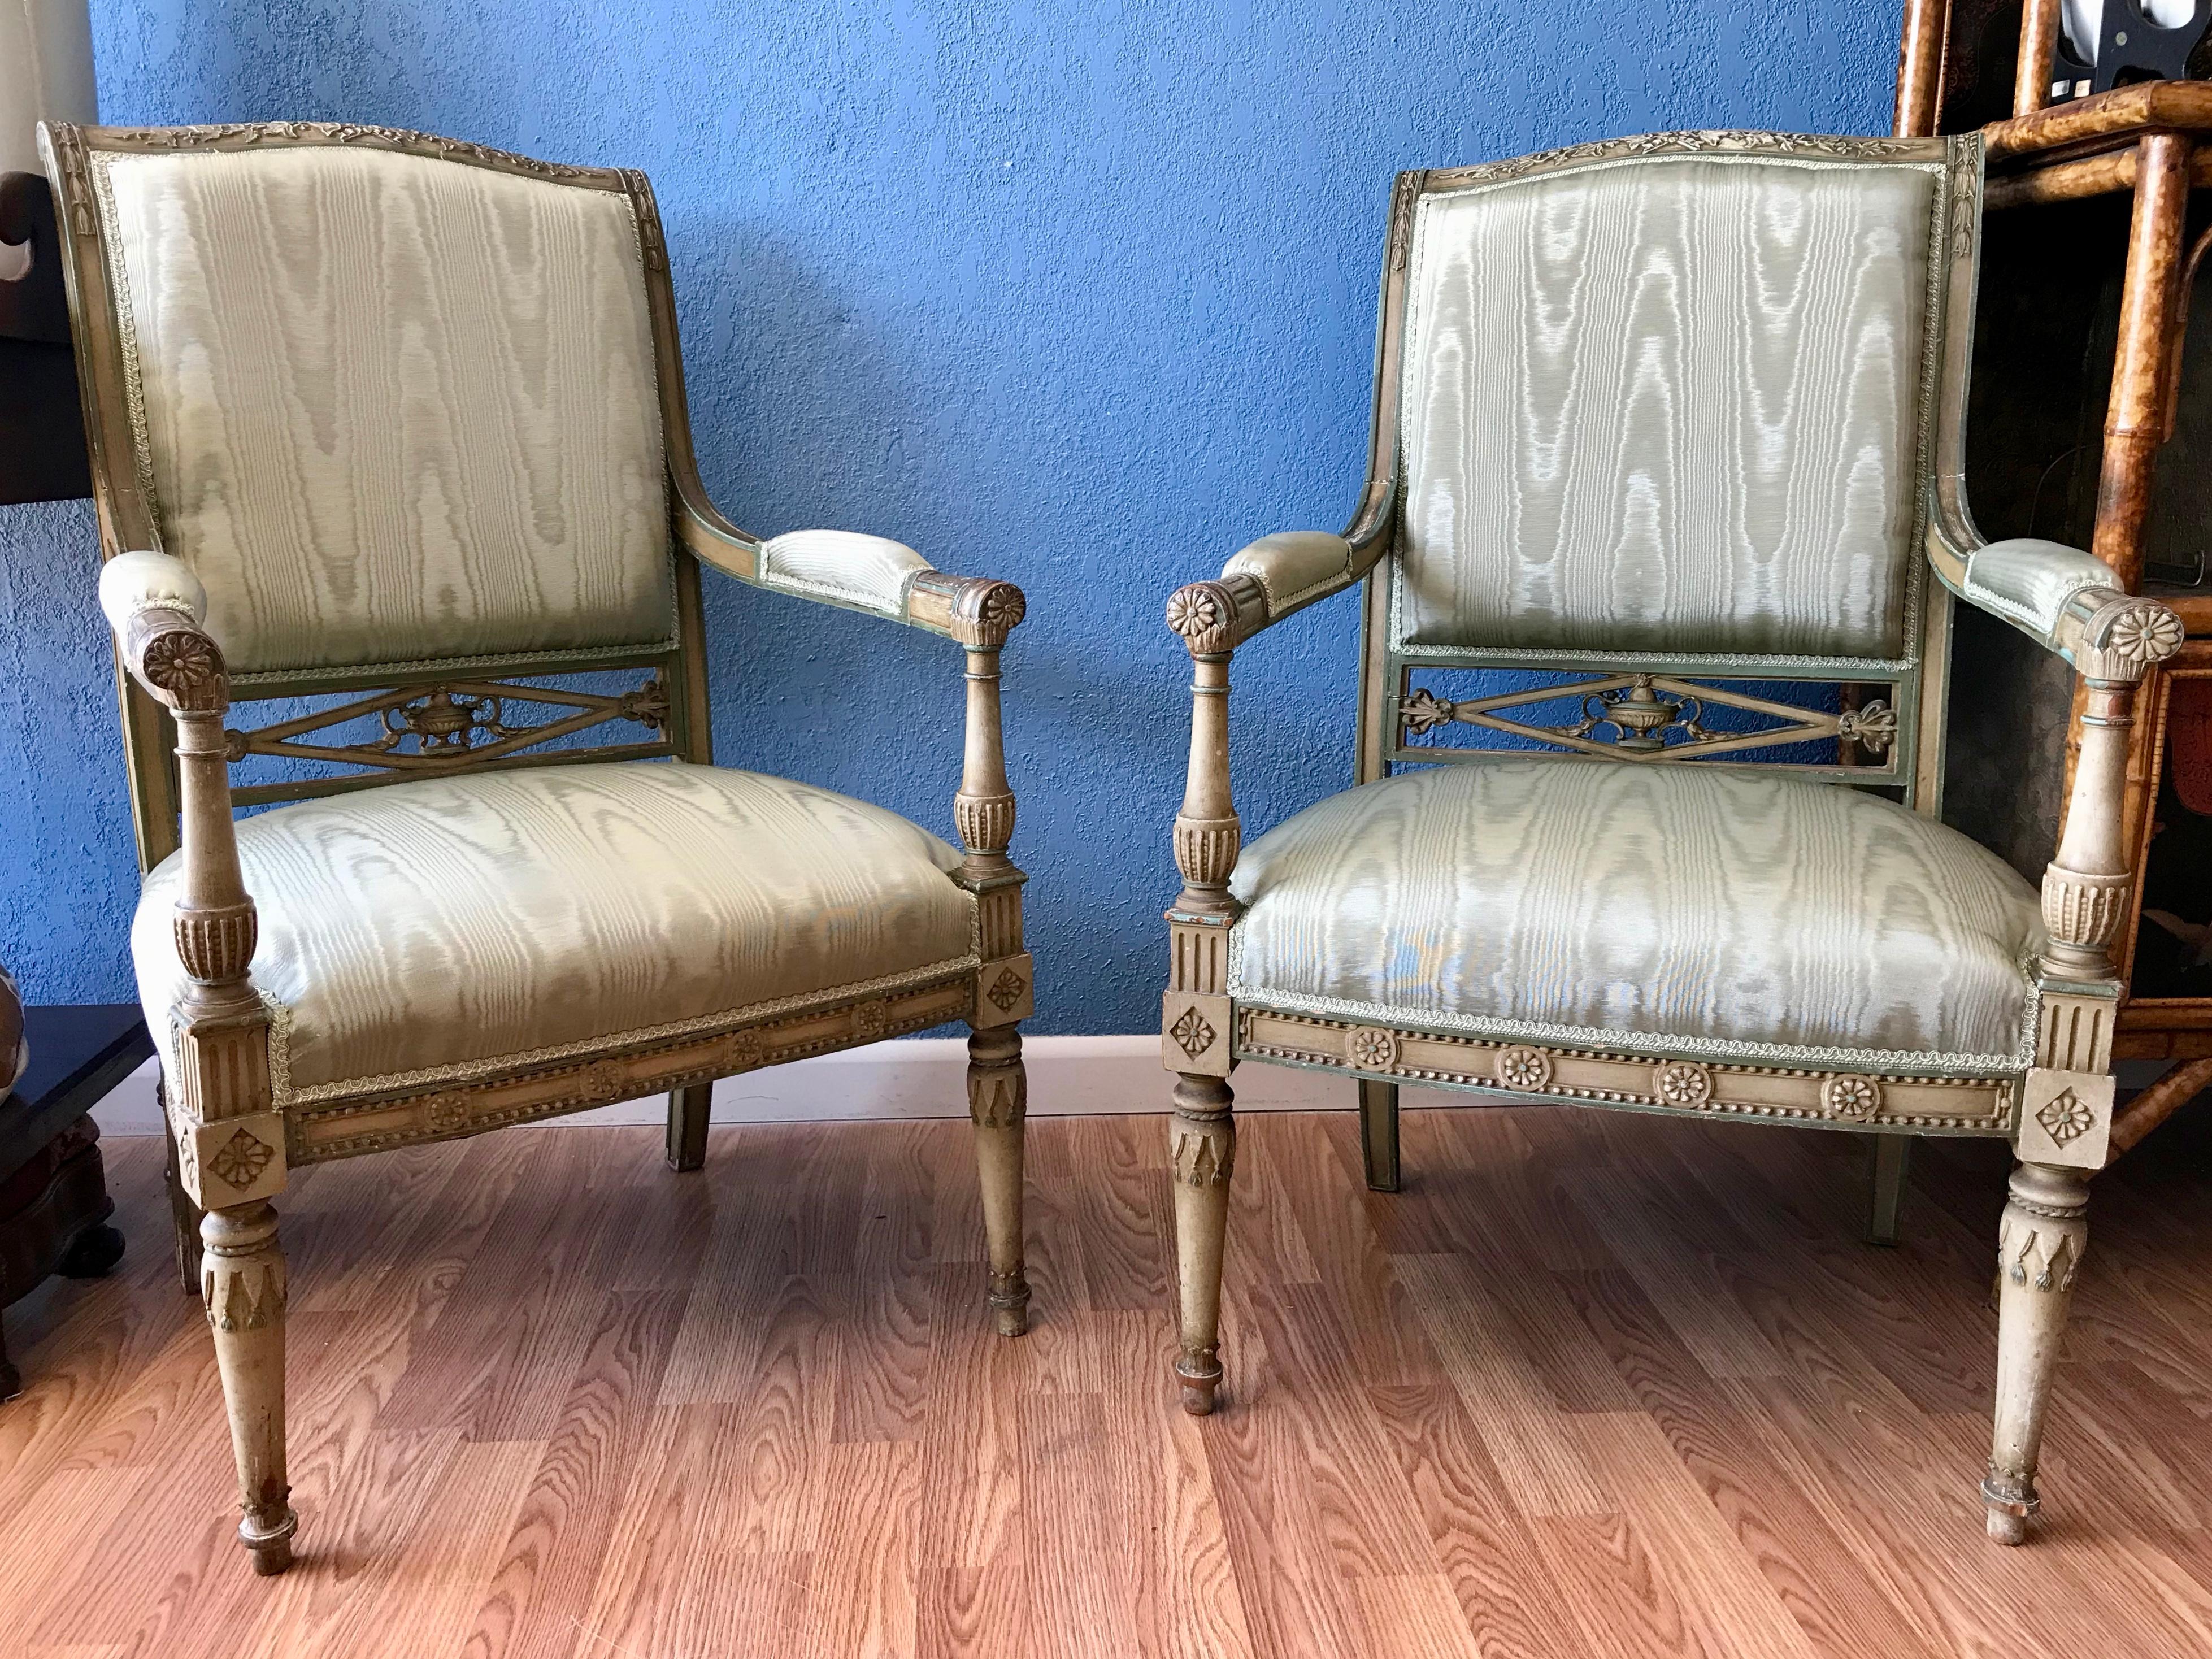 The chairs are accented with striking carving.
They are finished with a pale green wash and richly upholstered with silk moire'.
A beautiful Continental pair.